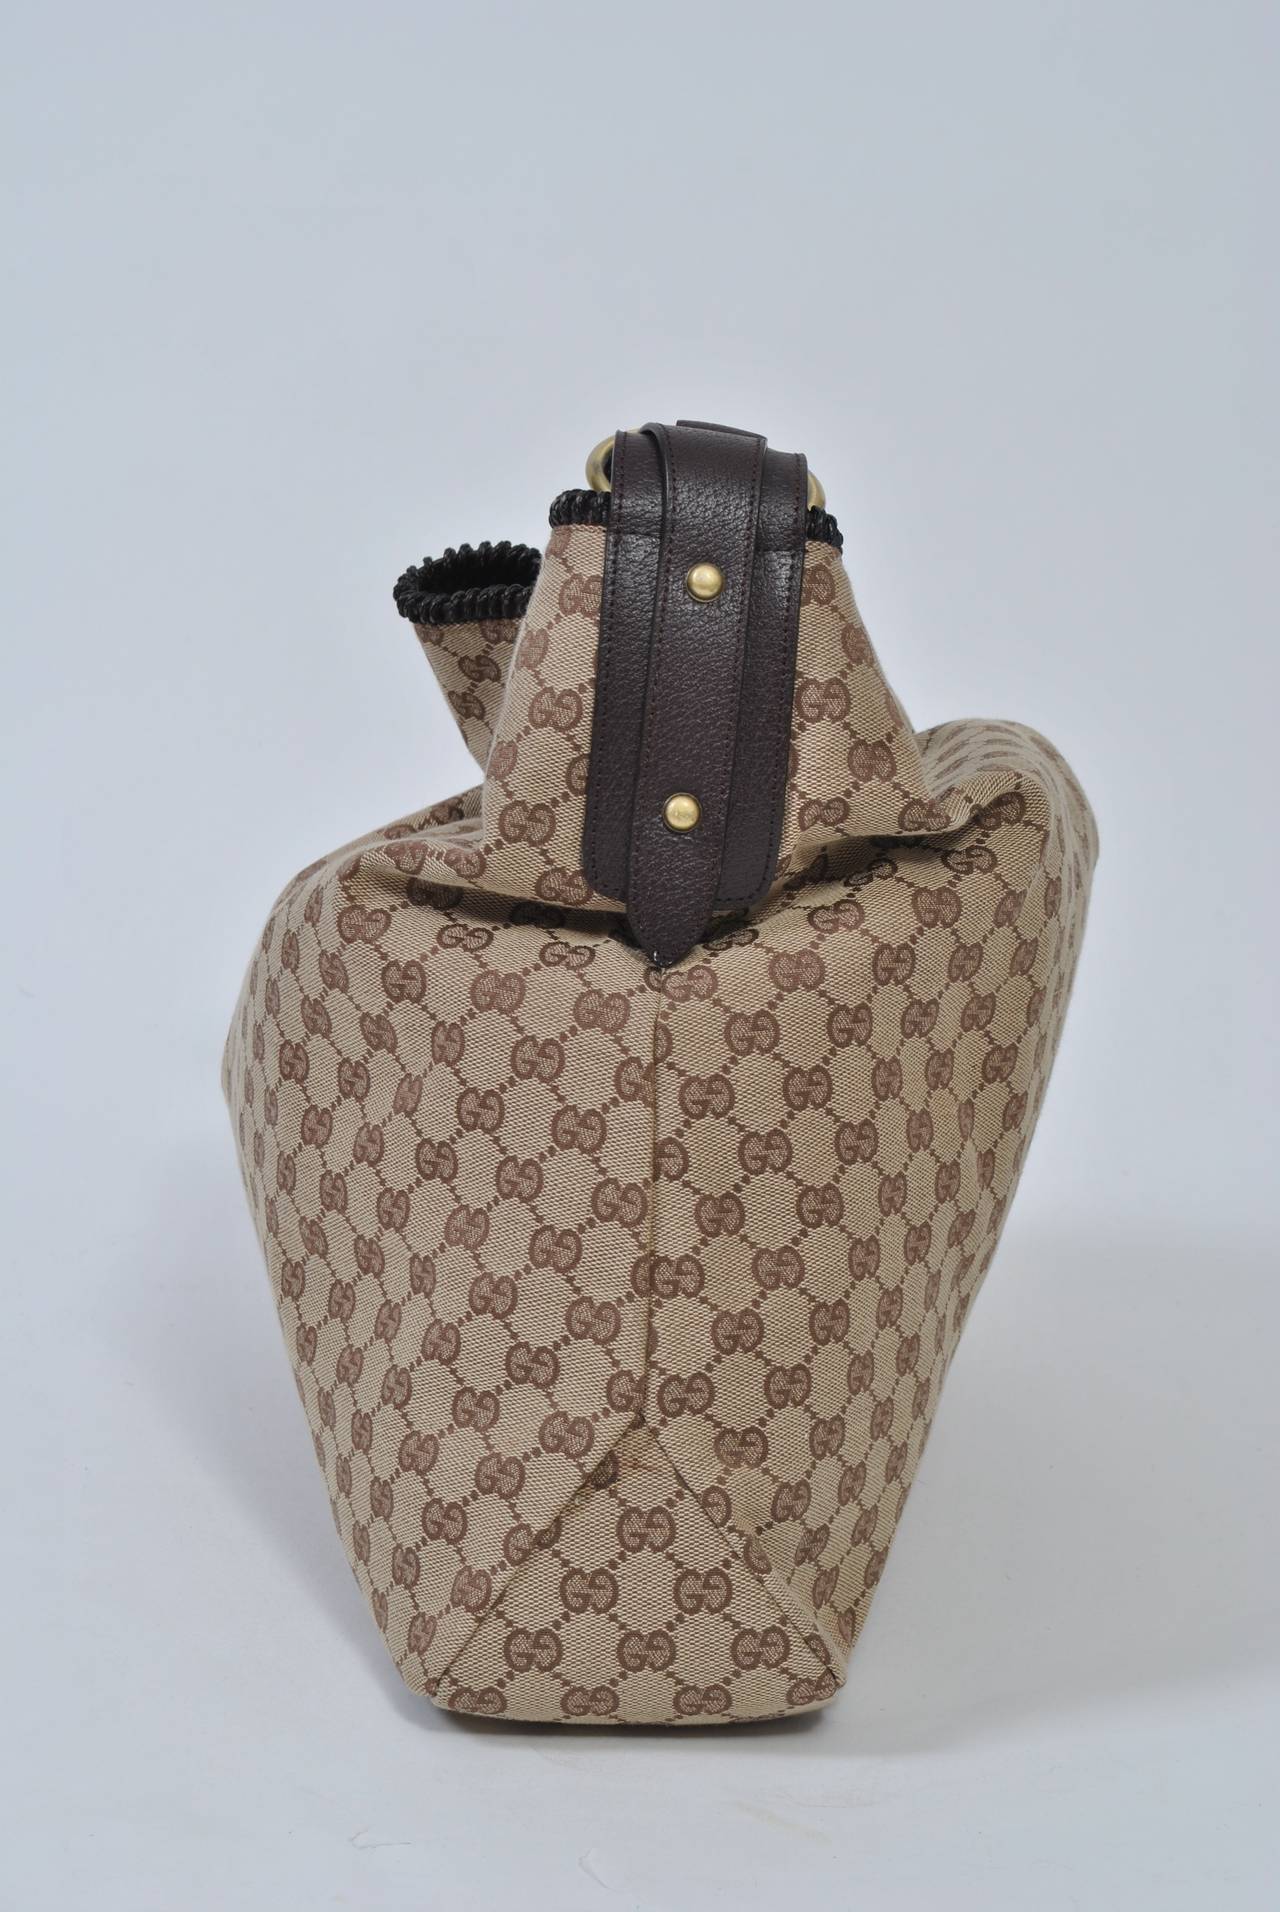 Large Gucci horsebit hobo bag in brown logo fabric with brown leather trim. Excellent condition inside and out.